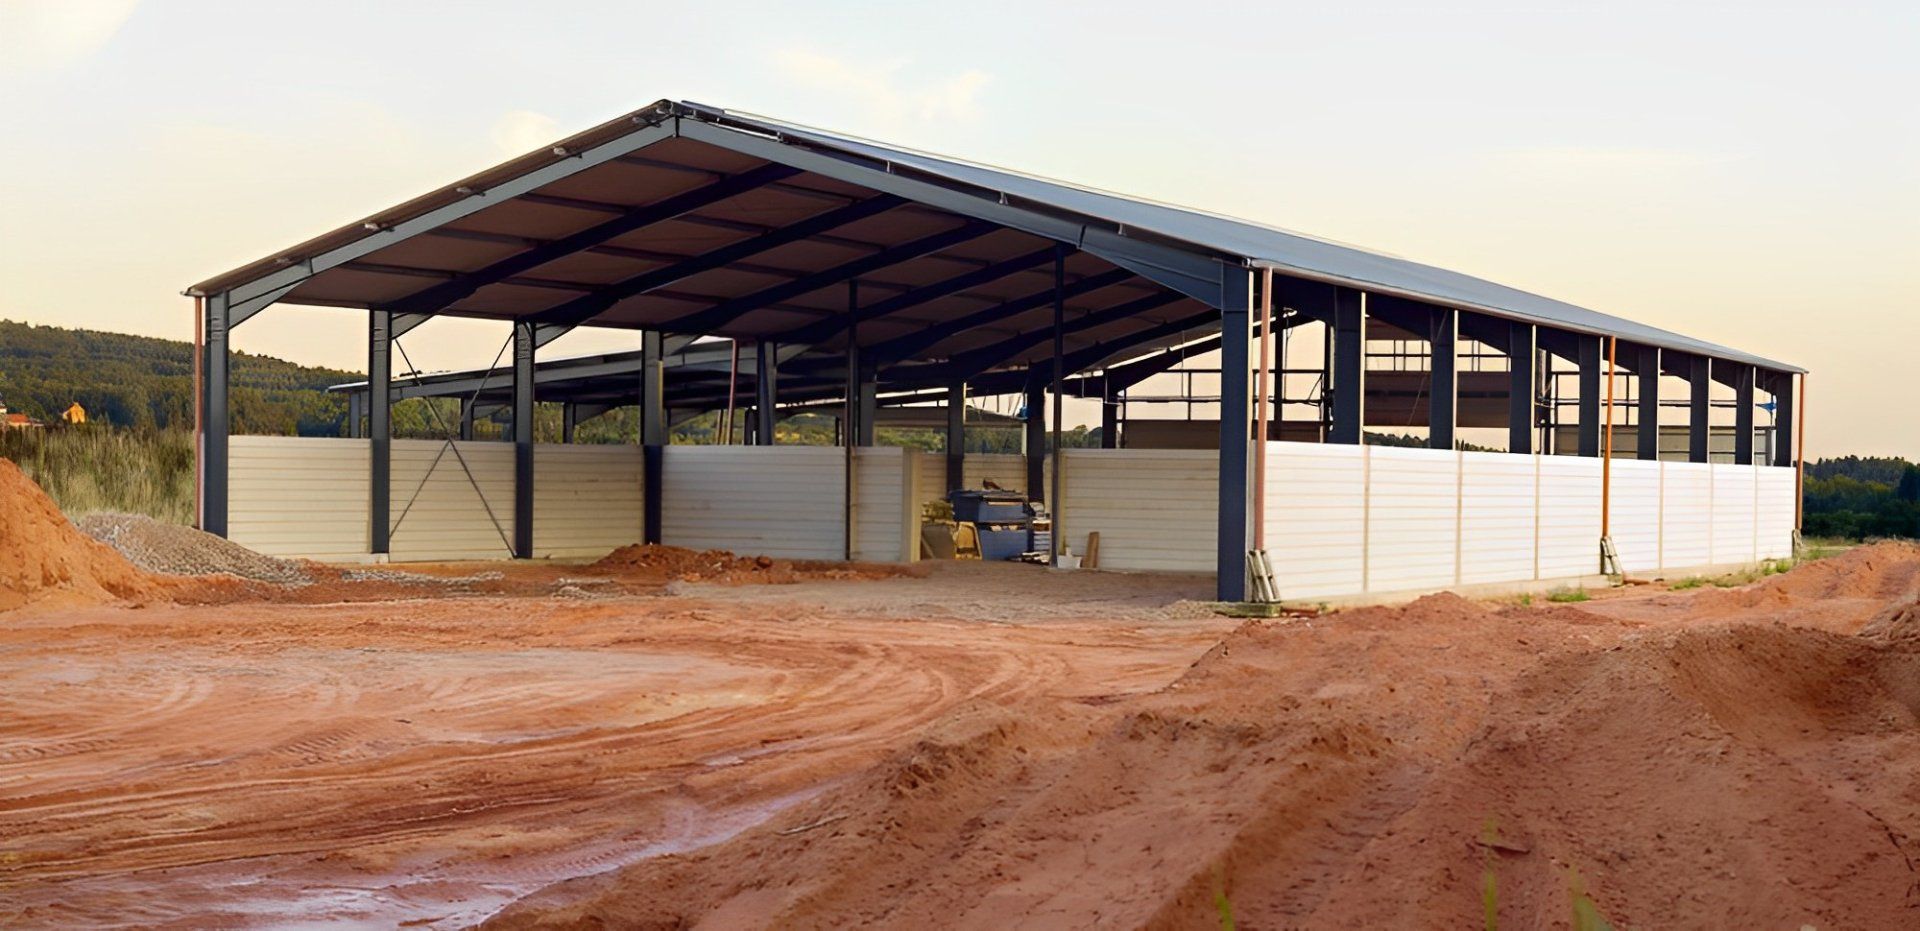 New Agriculture Building — Industrial Builders in Bathurst, NSW